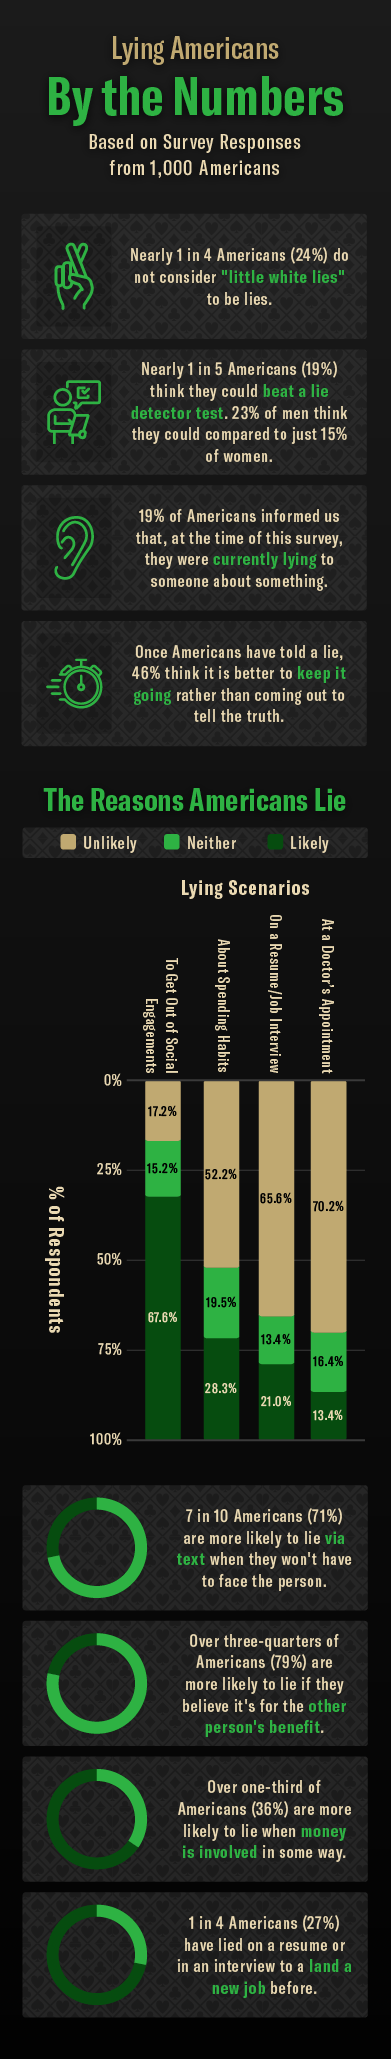 A mobile infographic showing the results of a survey about how Americans lie